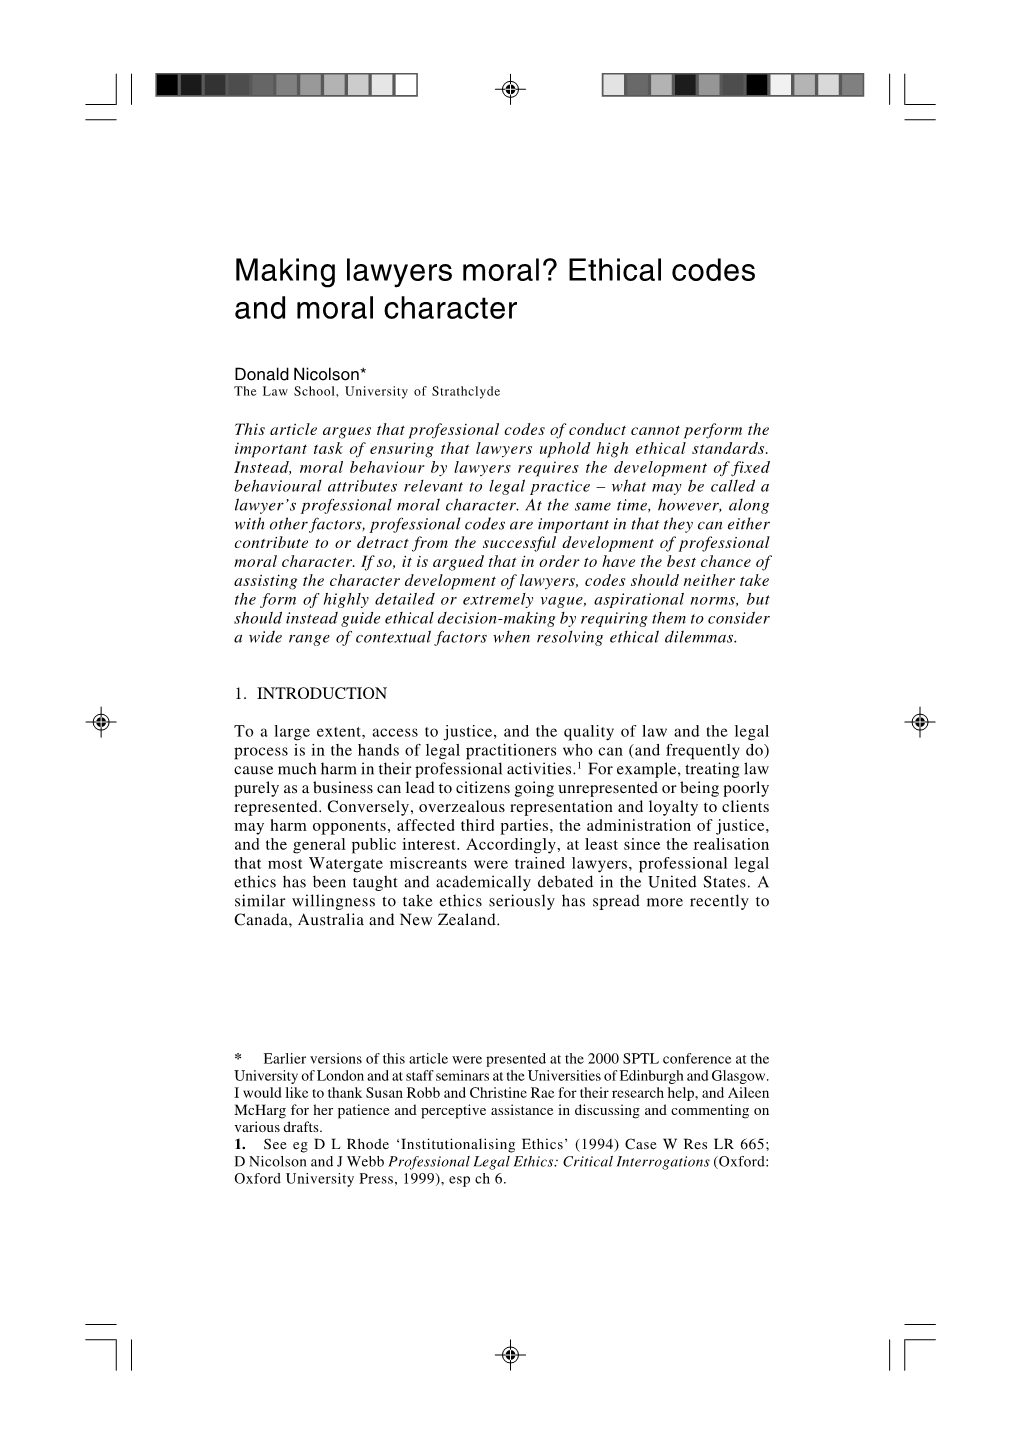 Making Lawyers Moral? Ethical Codes and Moral Character